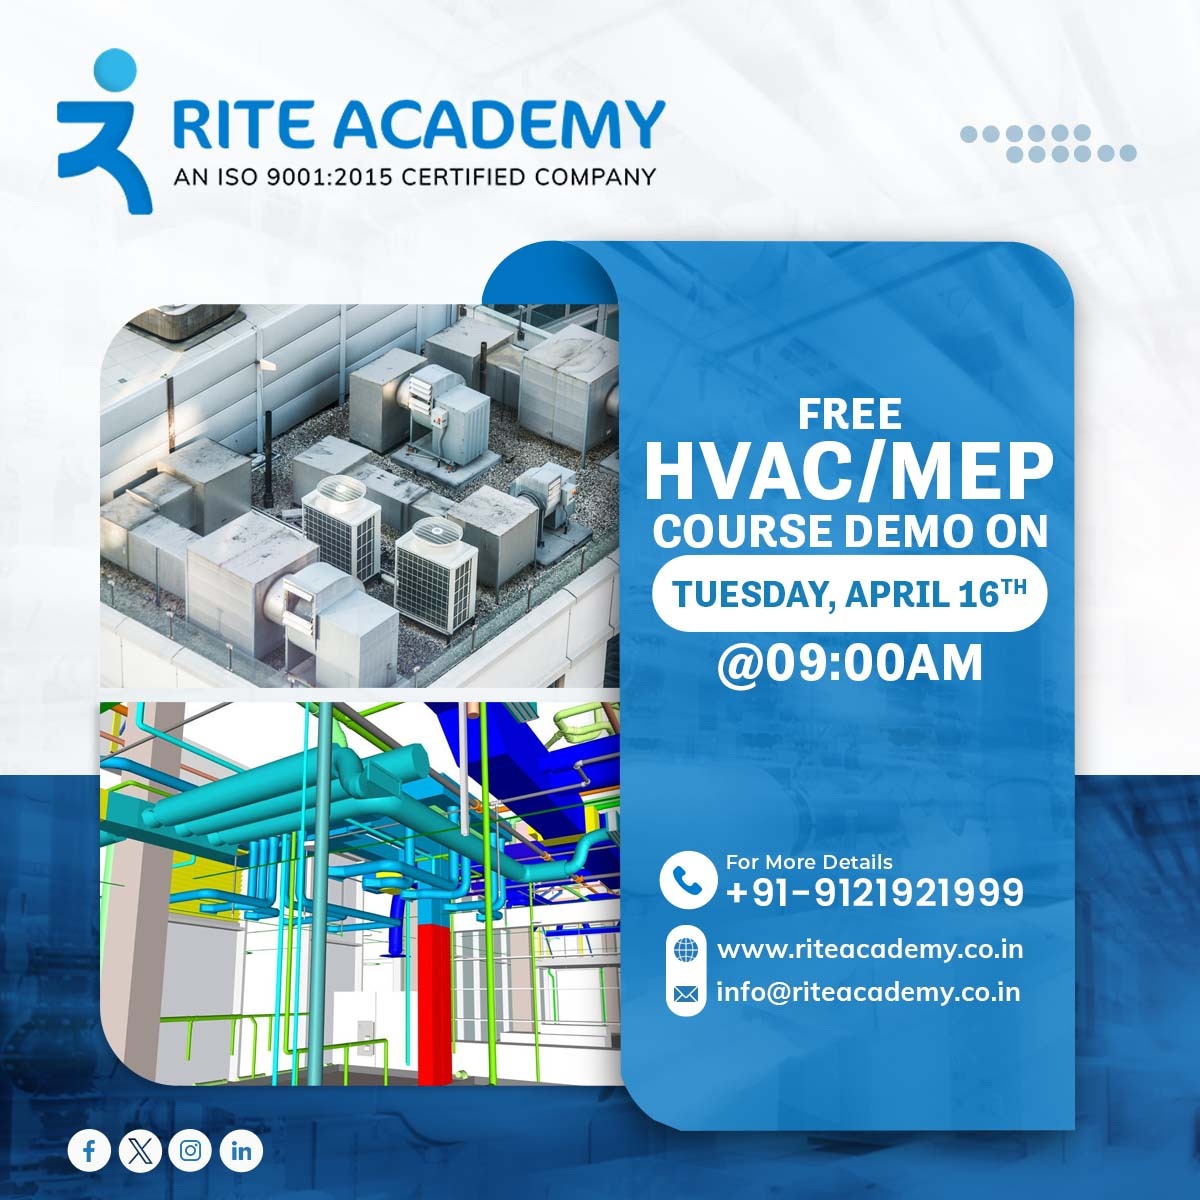 Looking to start a career in HVAC/MEP? 💼💡

Join our FREE demo course on April 16th at 9:00 AM. 🎓 

Visit our website to secure your reservation or give us a call for the HVAC and MEP Training Program.

#riteacademy #meptraining #hvactraining #mep #mepdesign #hvac